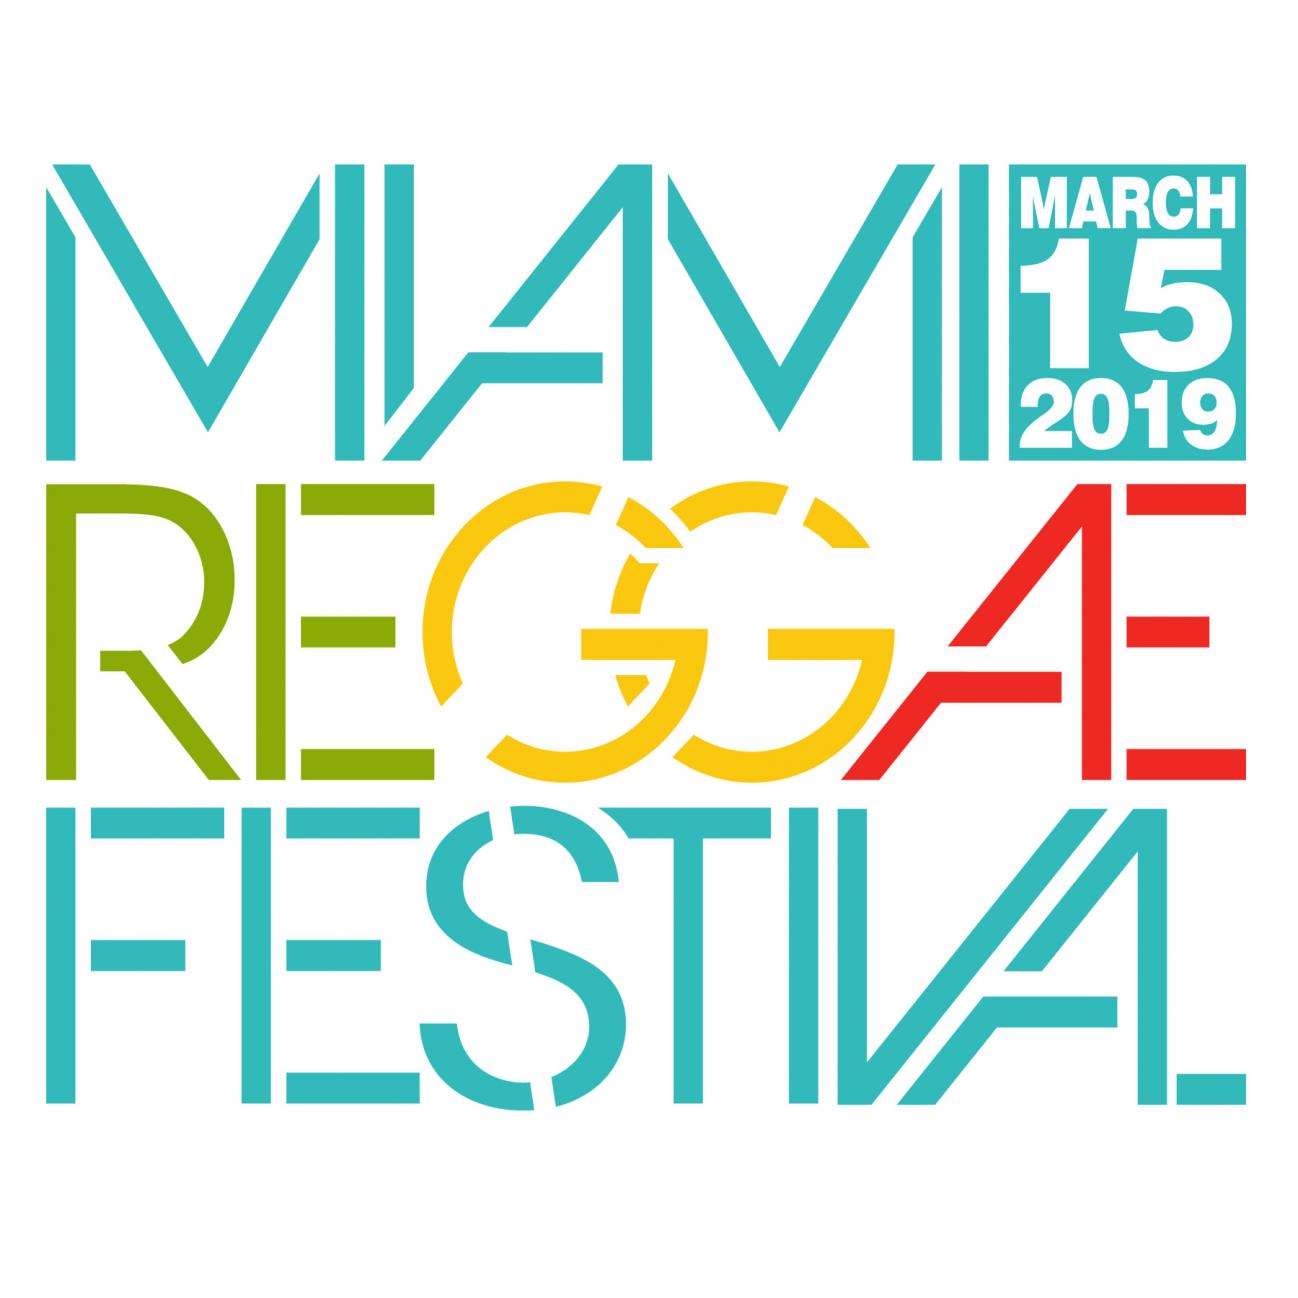 Annual Miami Reggae Festival Returns with their Vibe, Spirit and